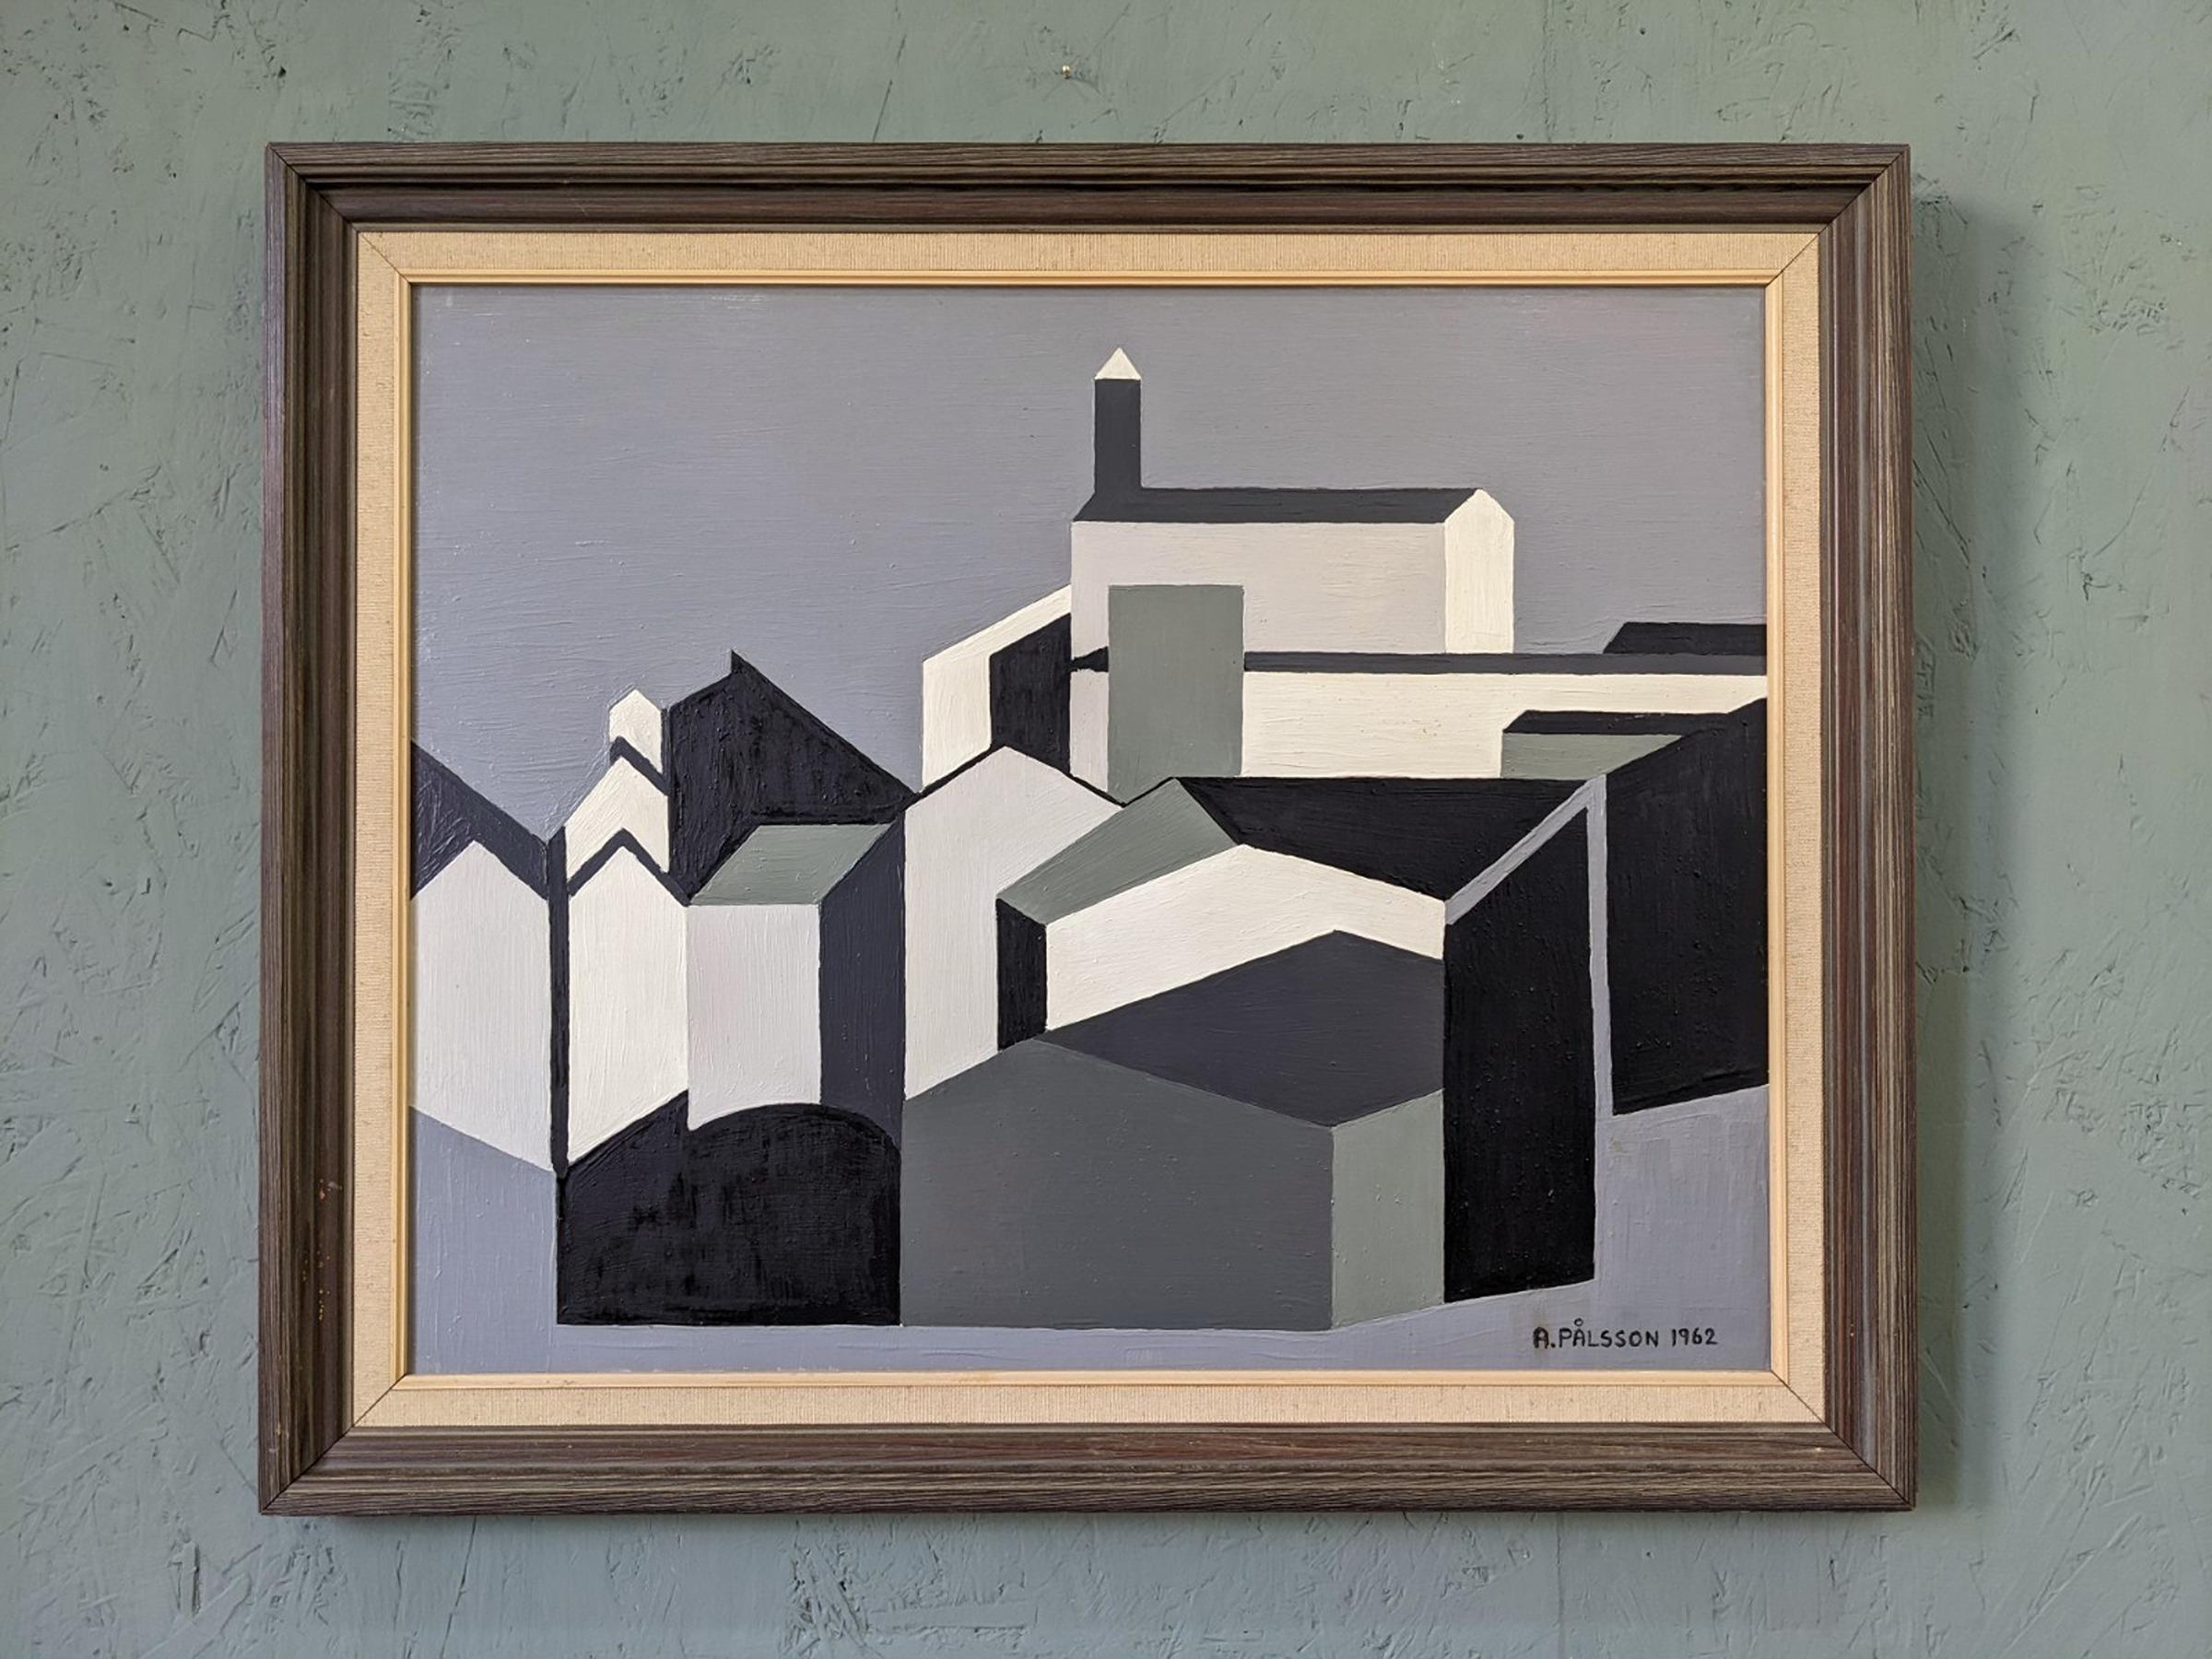 HOUSES IN MONOCHROME
Size: 54 x 65 cm (including frame)
Oil on board

A brilliantly executed cubist geometric mid century oil on board, painted in 1962.

Featuring angled shapes with hard edges that slot together seamlessly to form a view of houses,